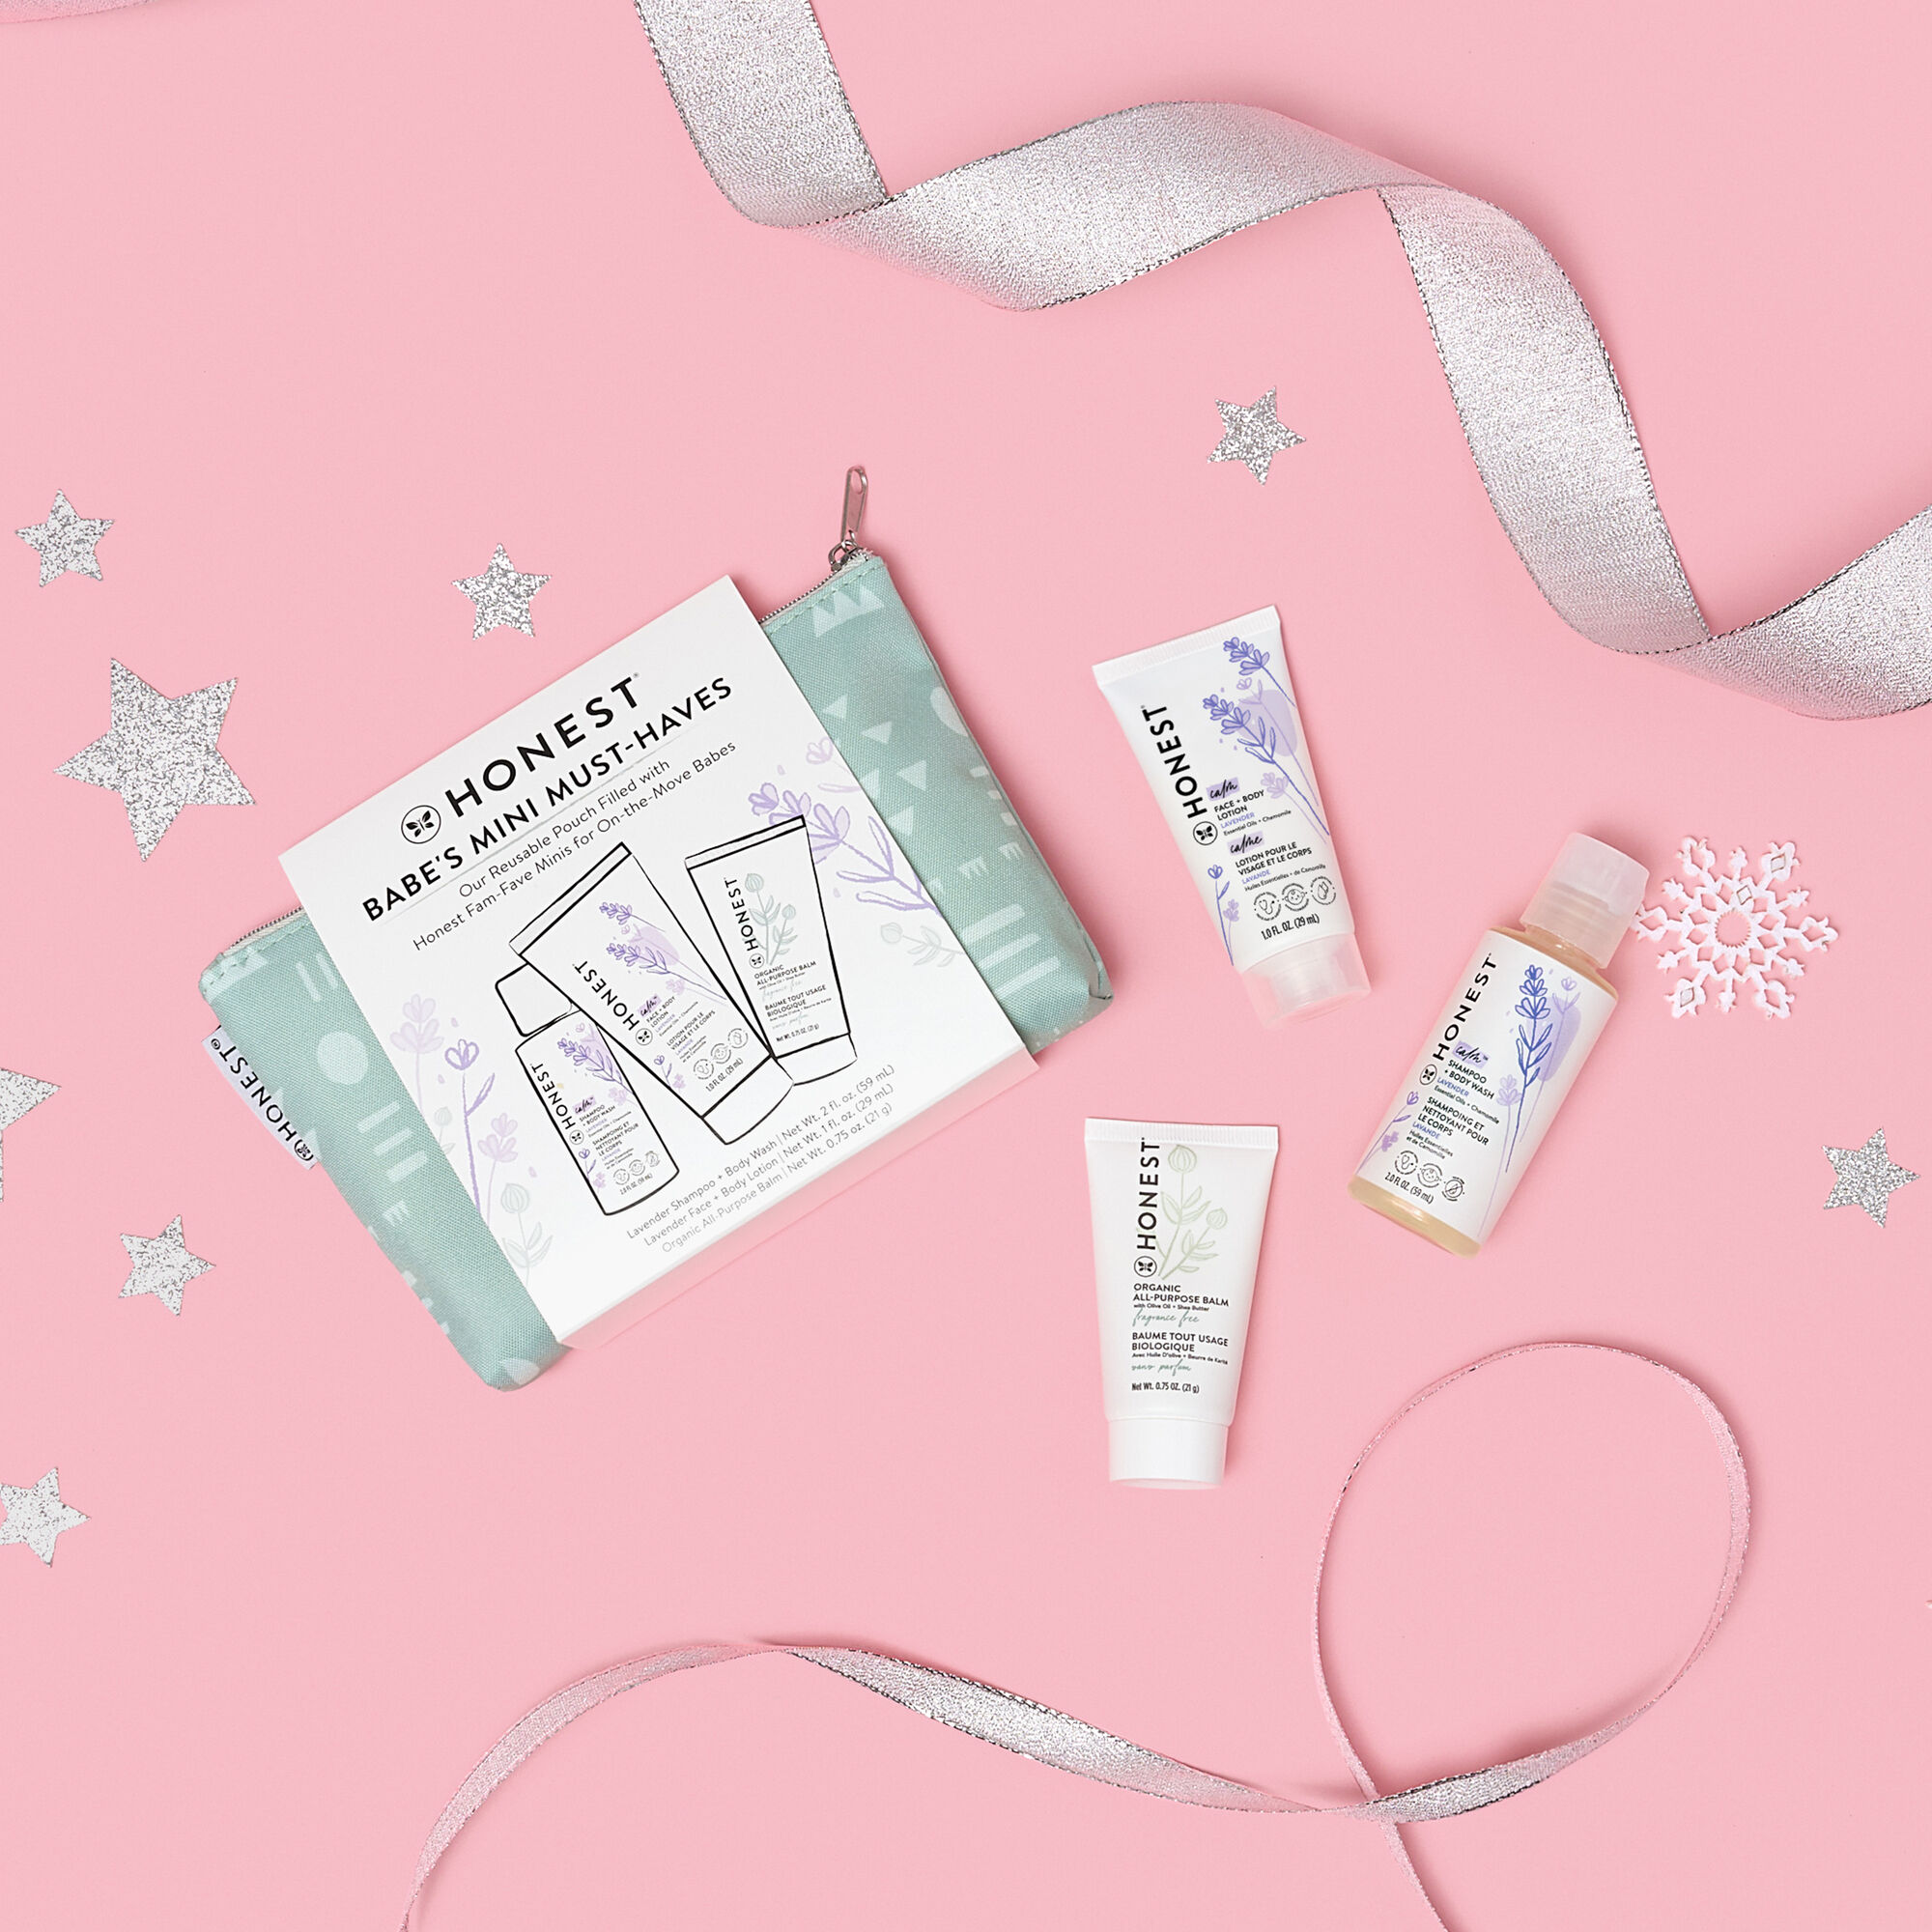 BABE'S MINI MUST-HAVES GIFT SET